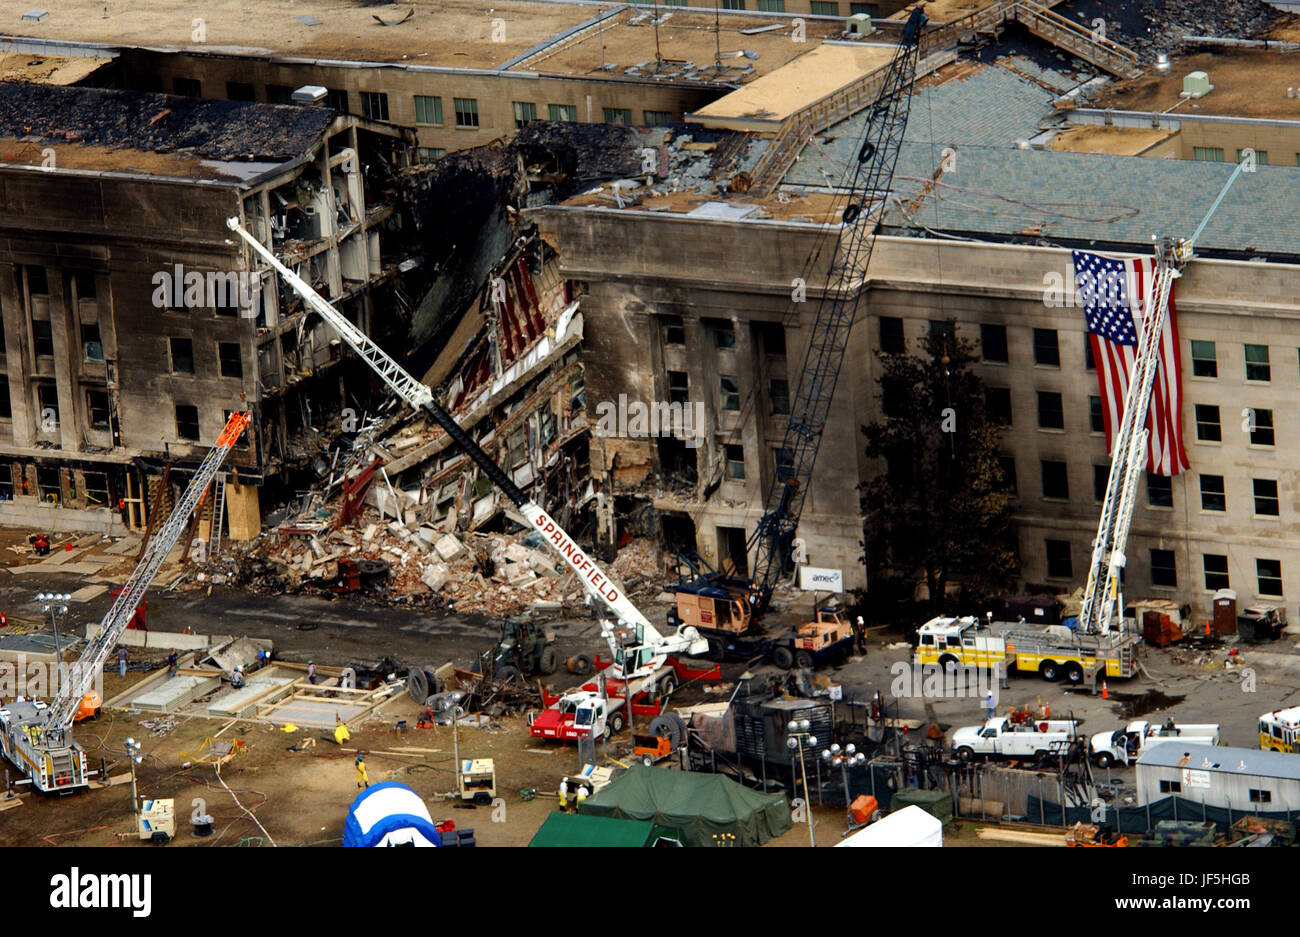 FBI agents, fire fighters, rescue workers and engineers work at the Pentagon crash site on Sept. 14, 2001, where a high-jacked American Airlines flight slammed into the building on Sept. 11.  The terrorist attack caused extensive damage to the west face of the building and followed similar attacks on the twin towers of the World Trade Center in New York City.   DoD photo by Tech. Sgt. Cedric H. Rudisill. Stock Photo